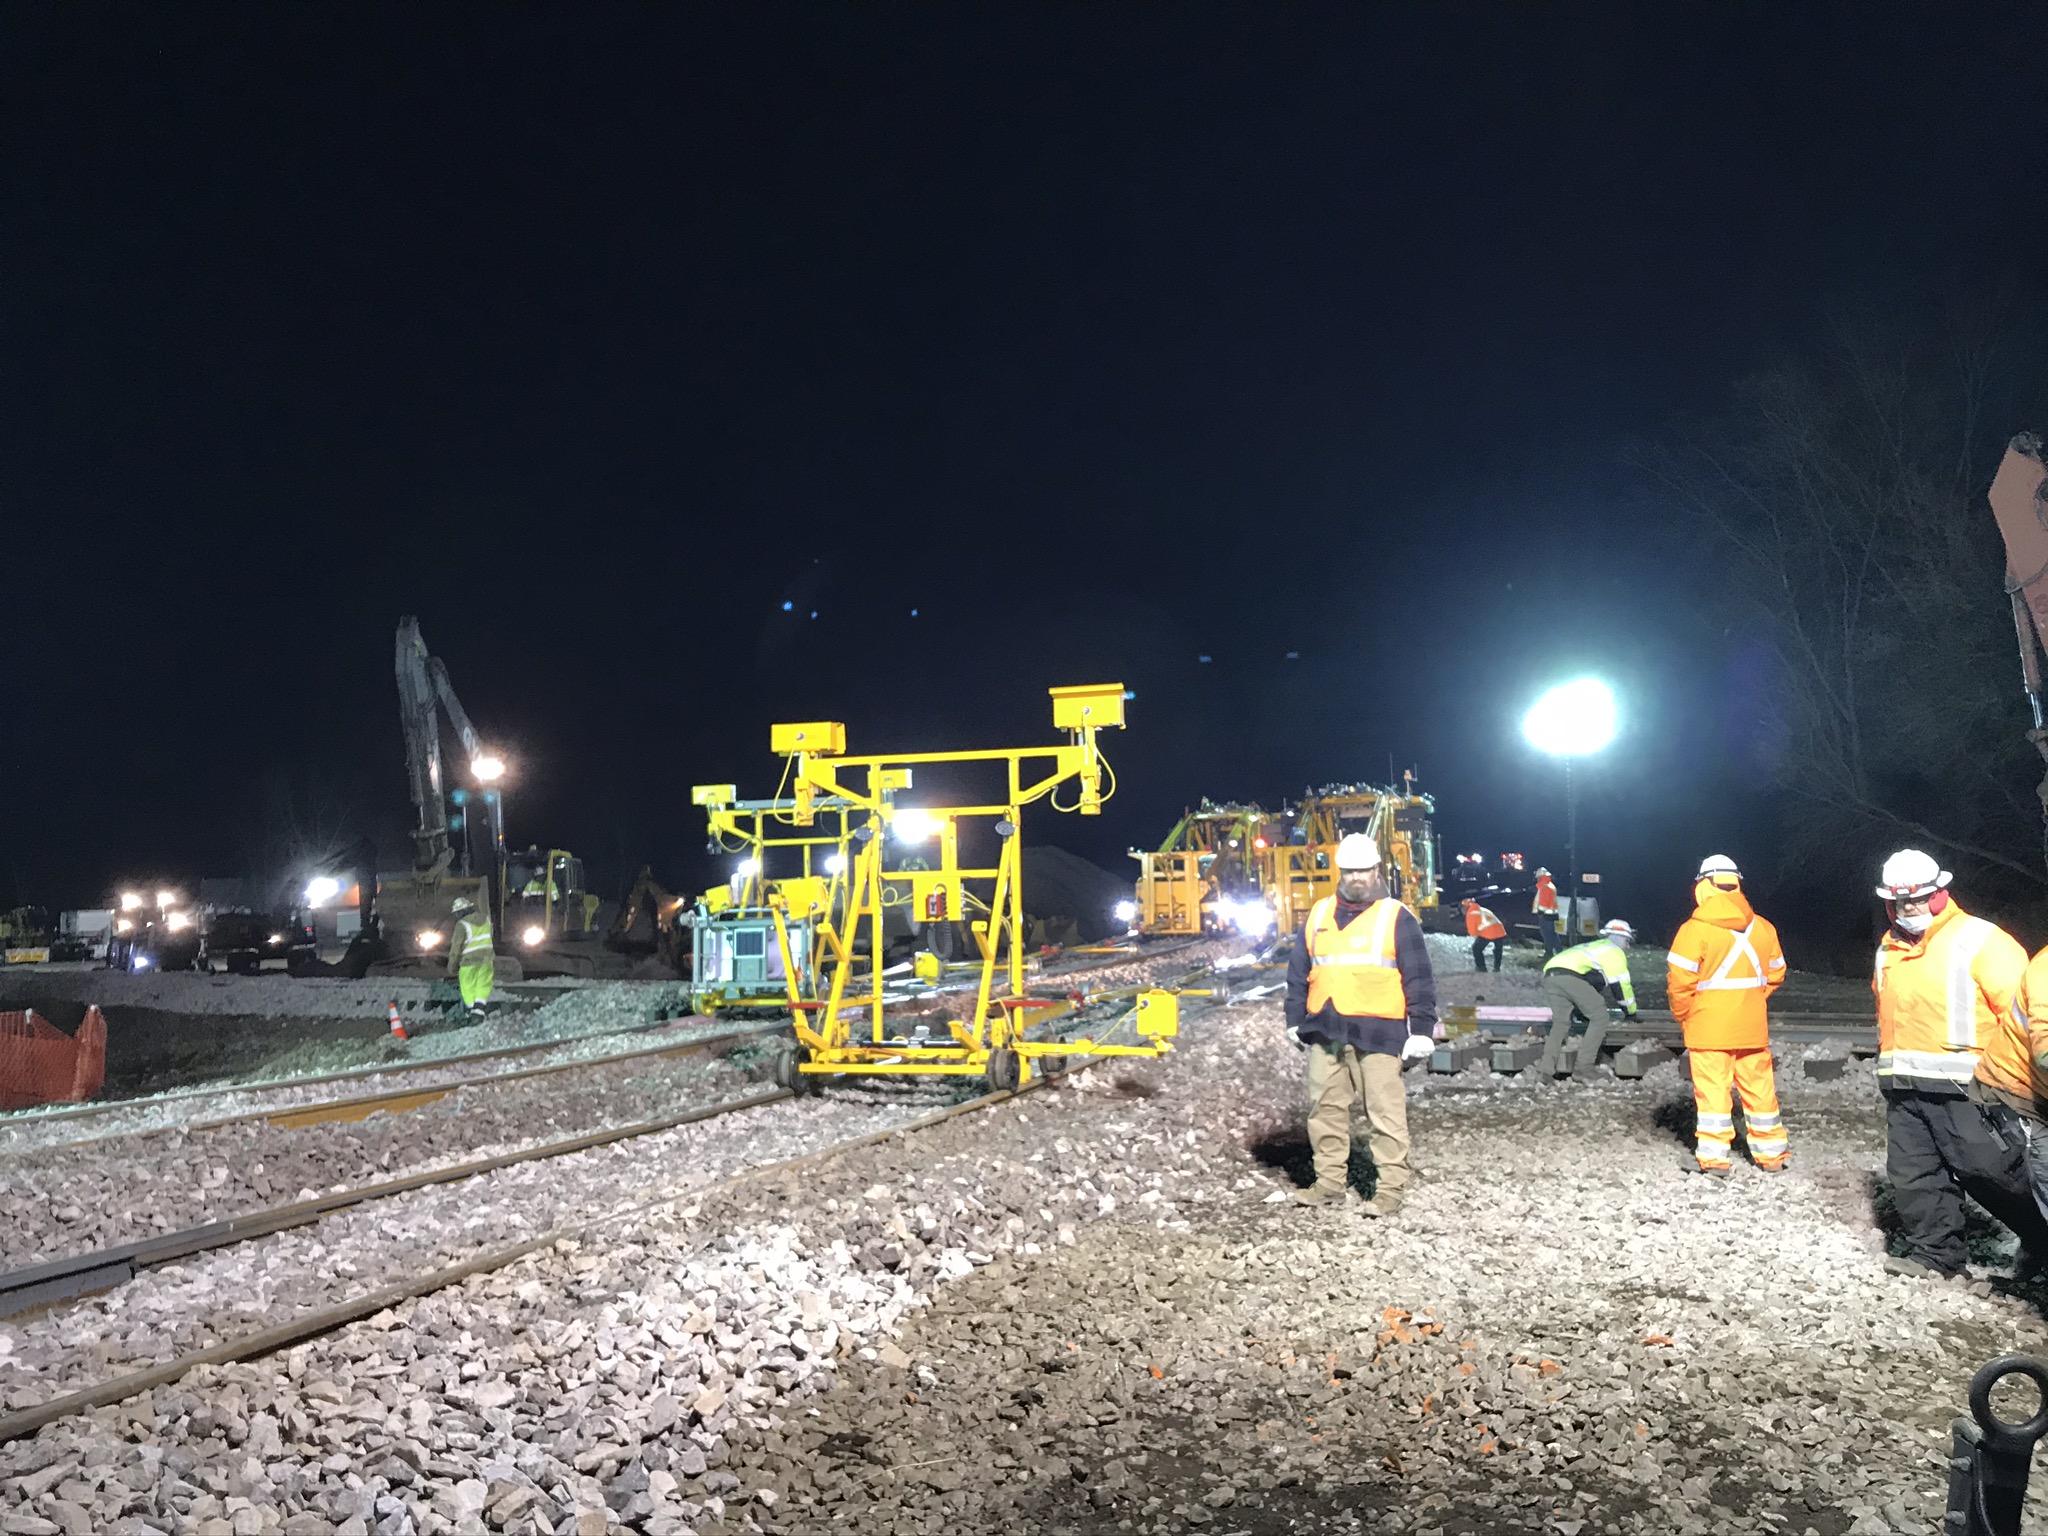 A yellow target frame rests on the northside Canadian Pacific track as orange-vest-clad workers supervise the work under spotlights.